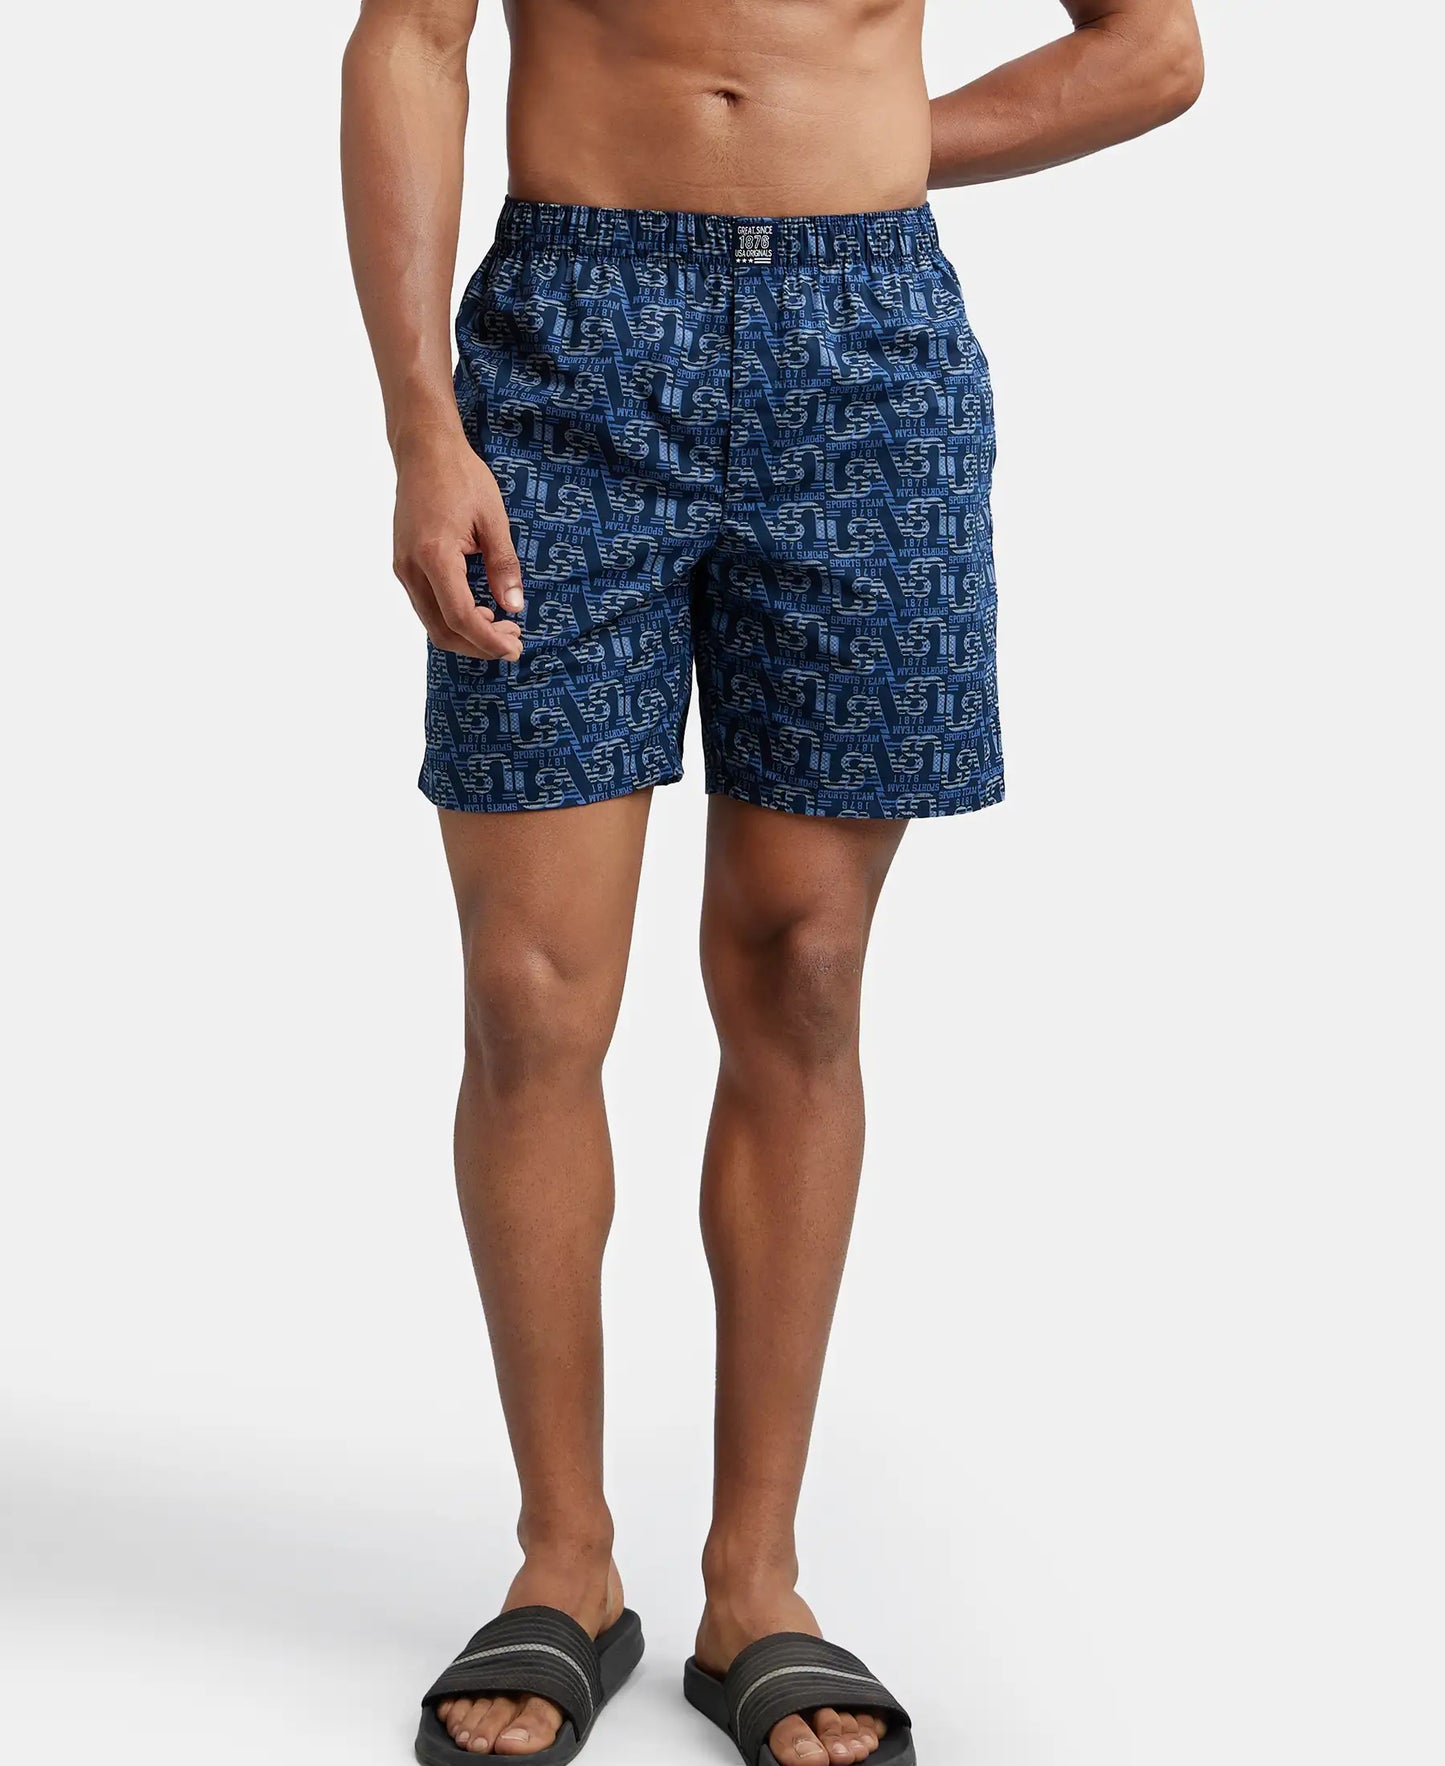 Super Combed Mercerized Cotton Woven Printed Boxer Shorts with Side Pocket - Navy Seaport Teal-11